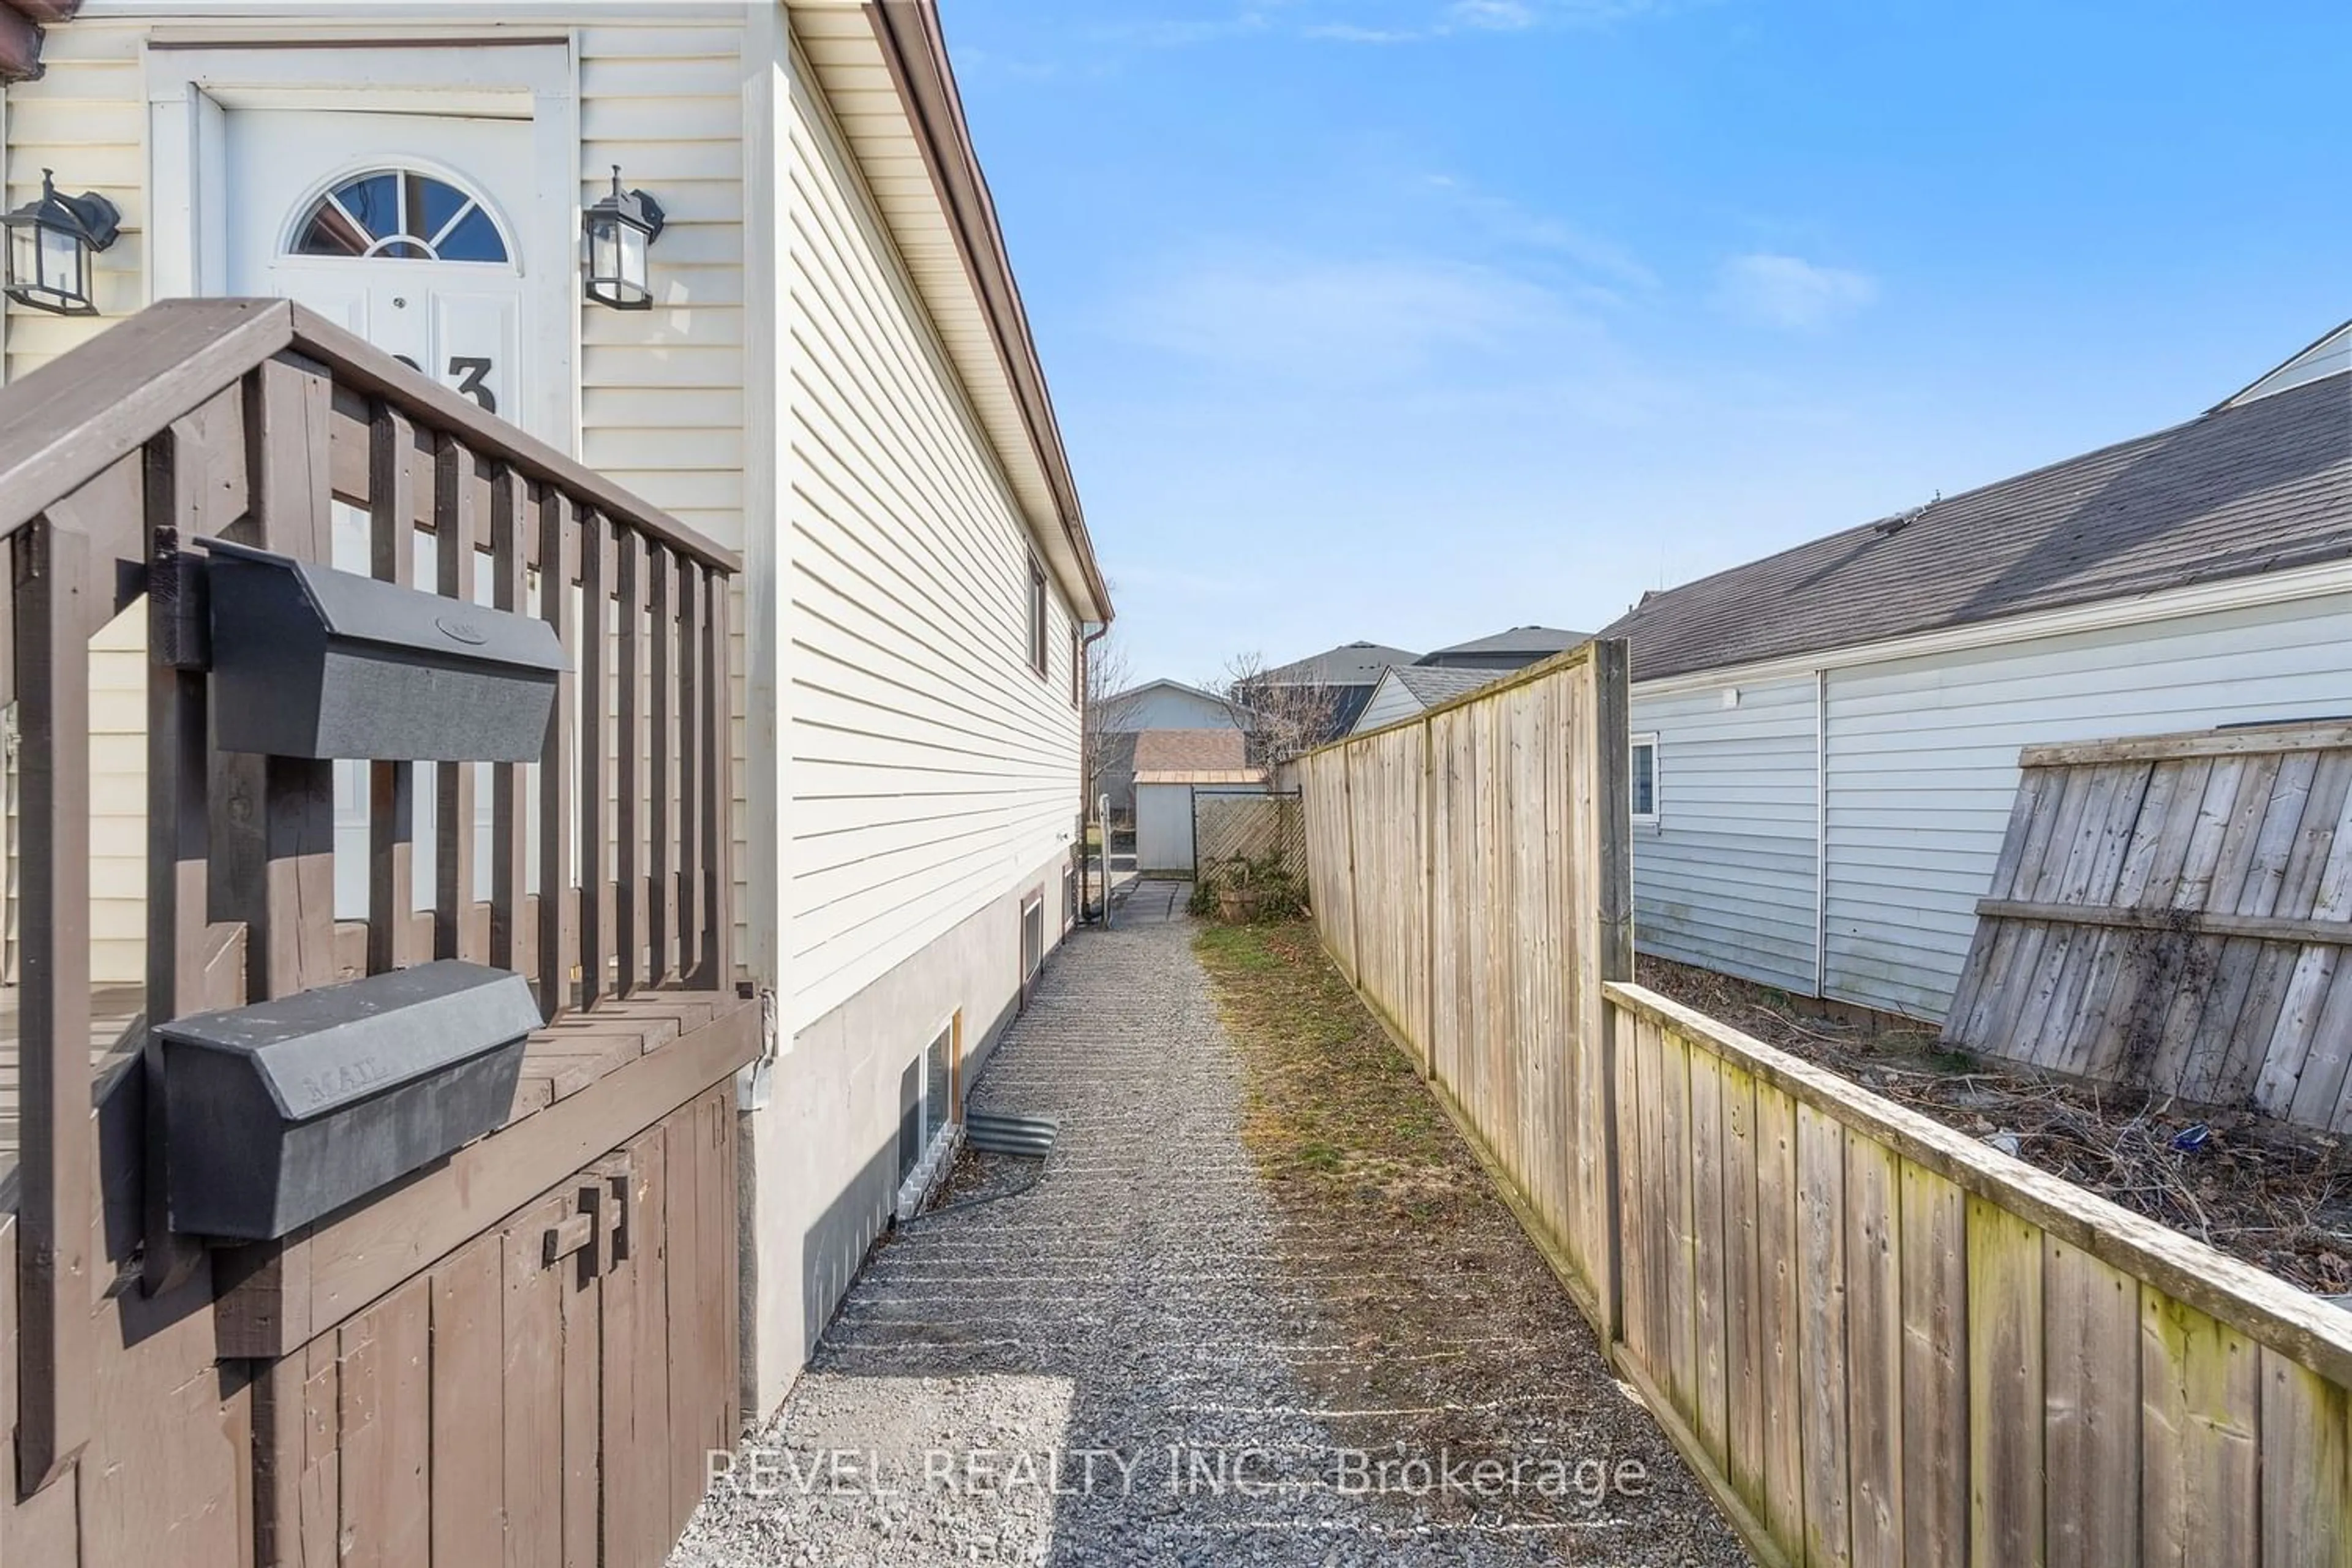 Fenced yard for 103 Powerview Ave, St. Catharines Ontario L2S 1X3